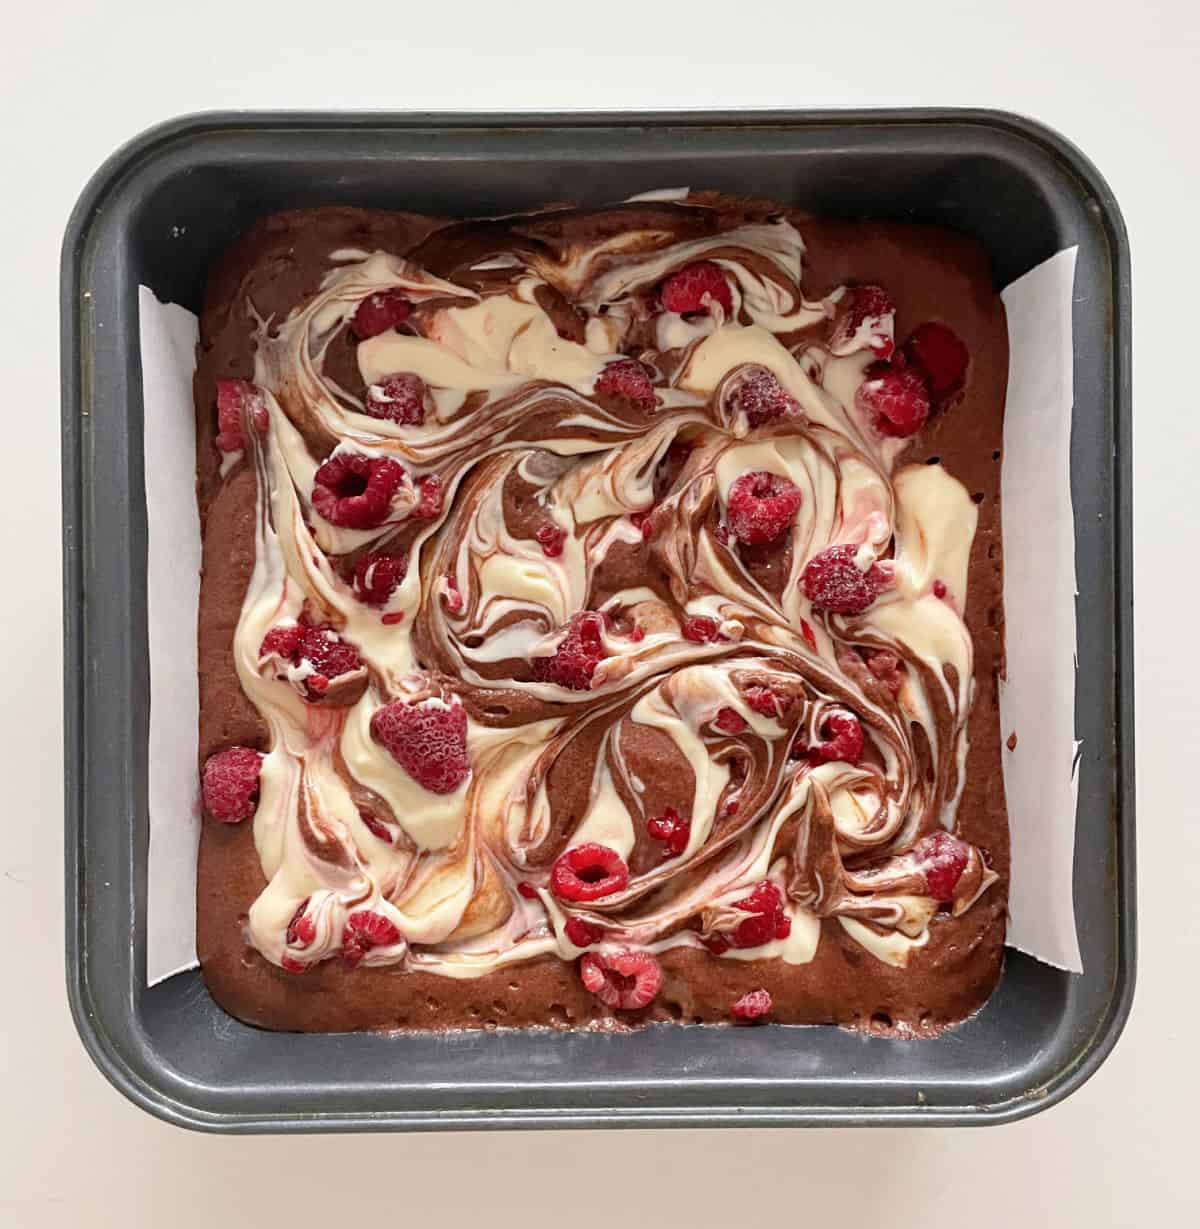 Cheesecake swirl brownie batter with raspberries ready to be baked in a metal square pan. 